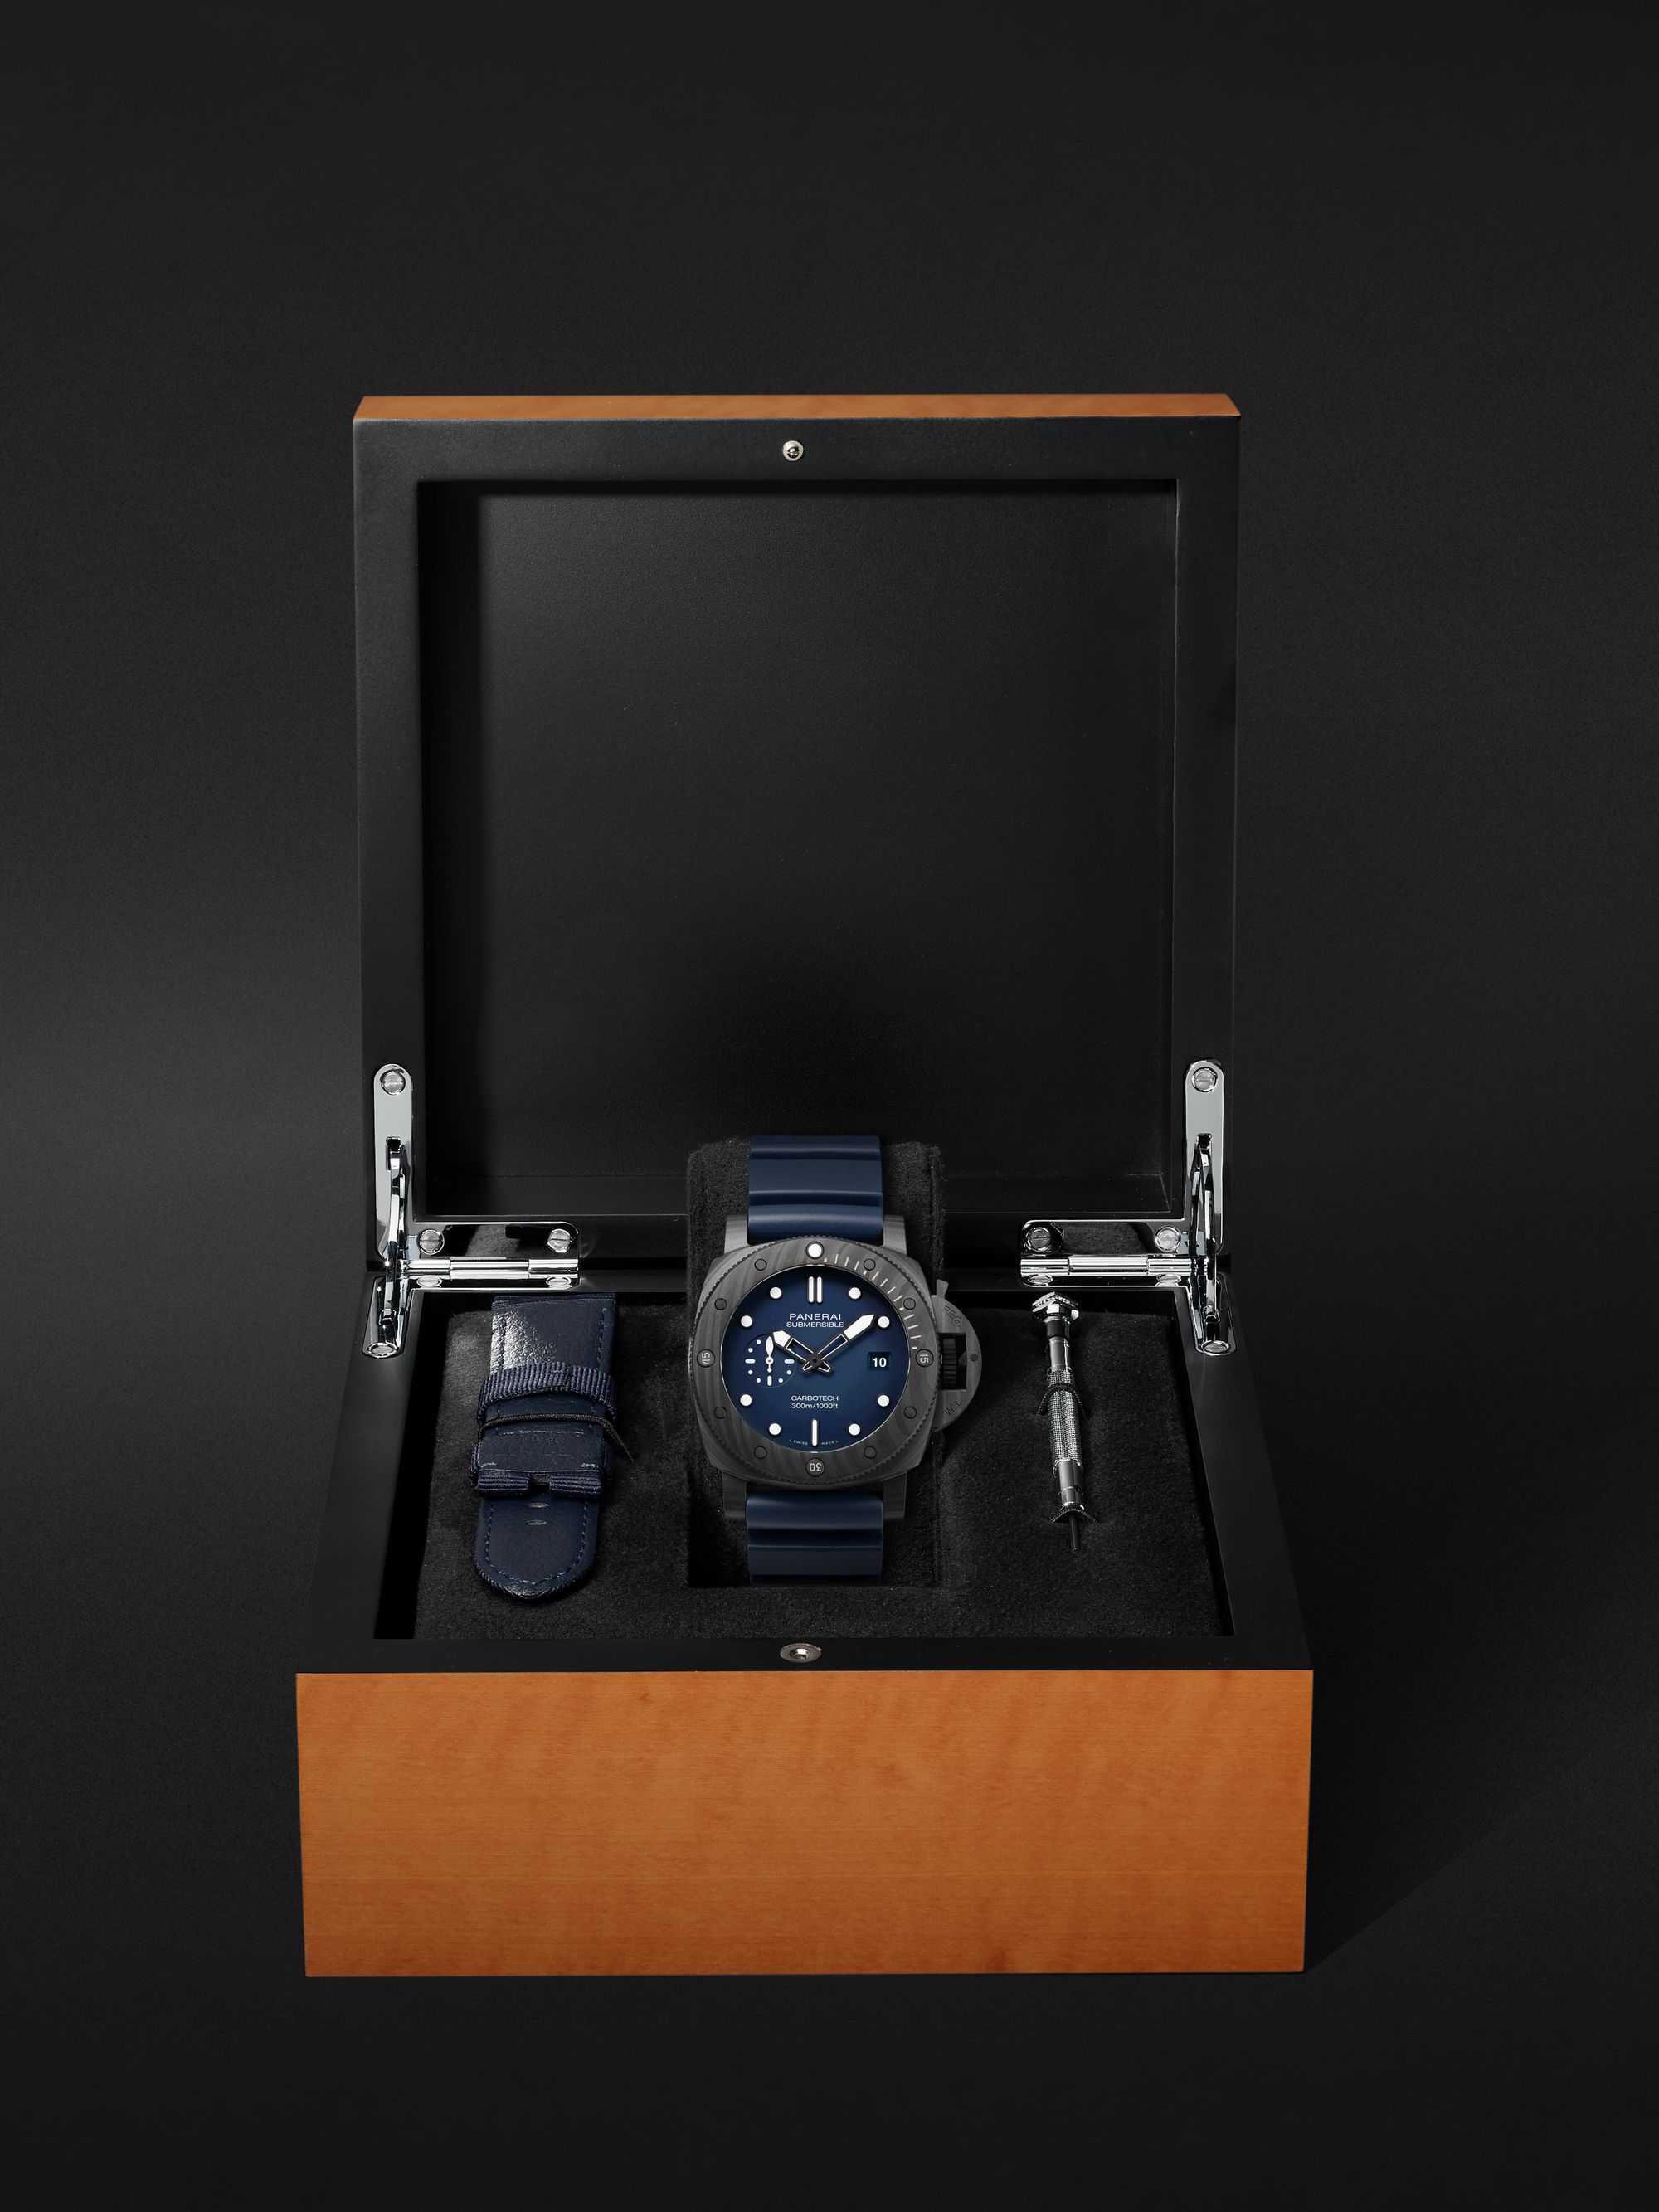 PANERAI Submersible QuarantaQuattro Automatic 44mm Carbotech™ and Rubber Watch, Ref. No. PAM01232